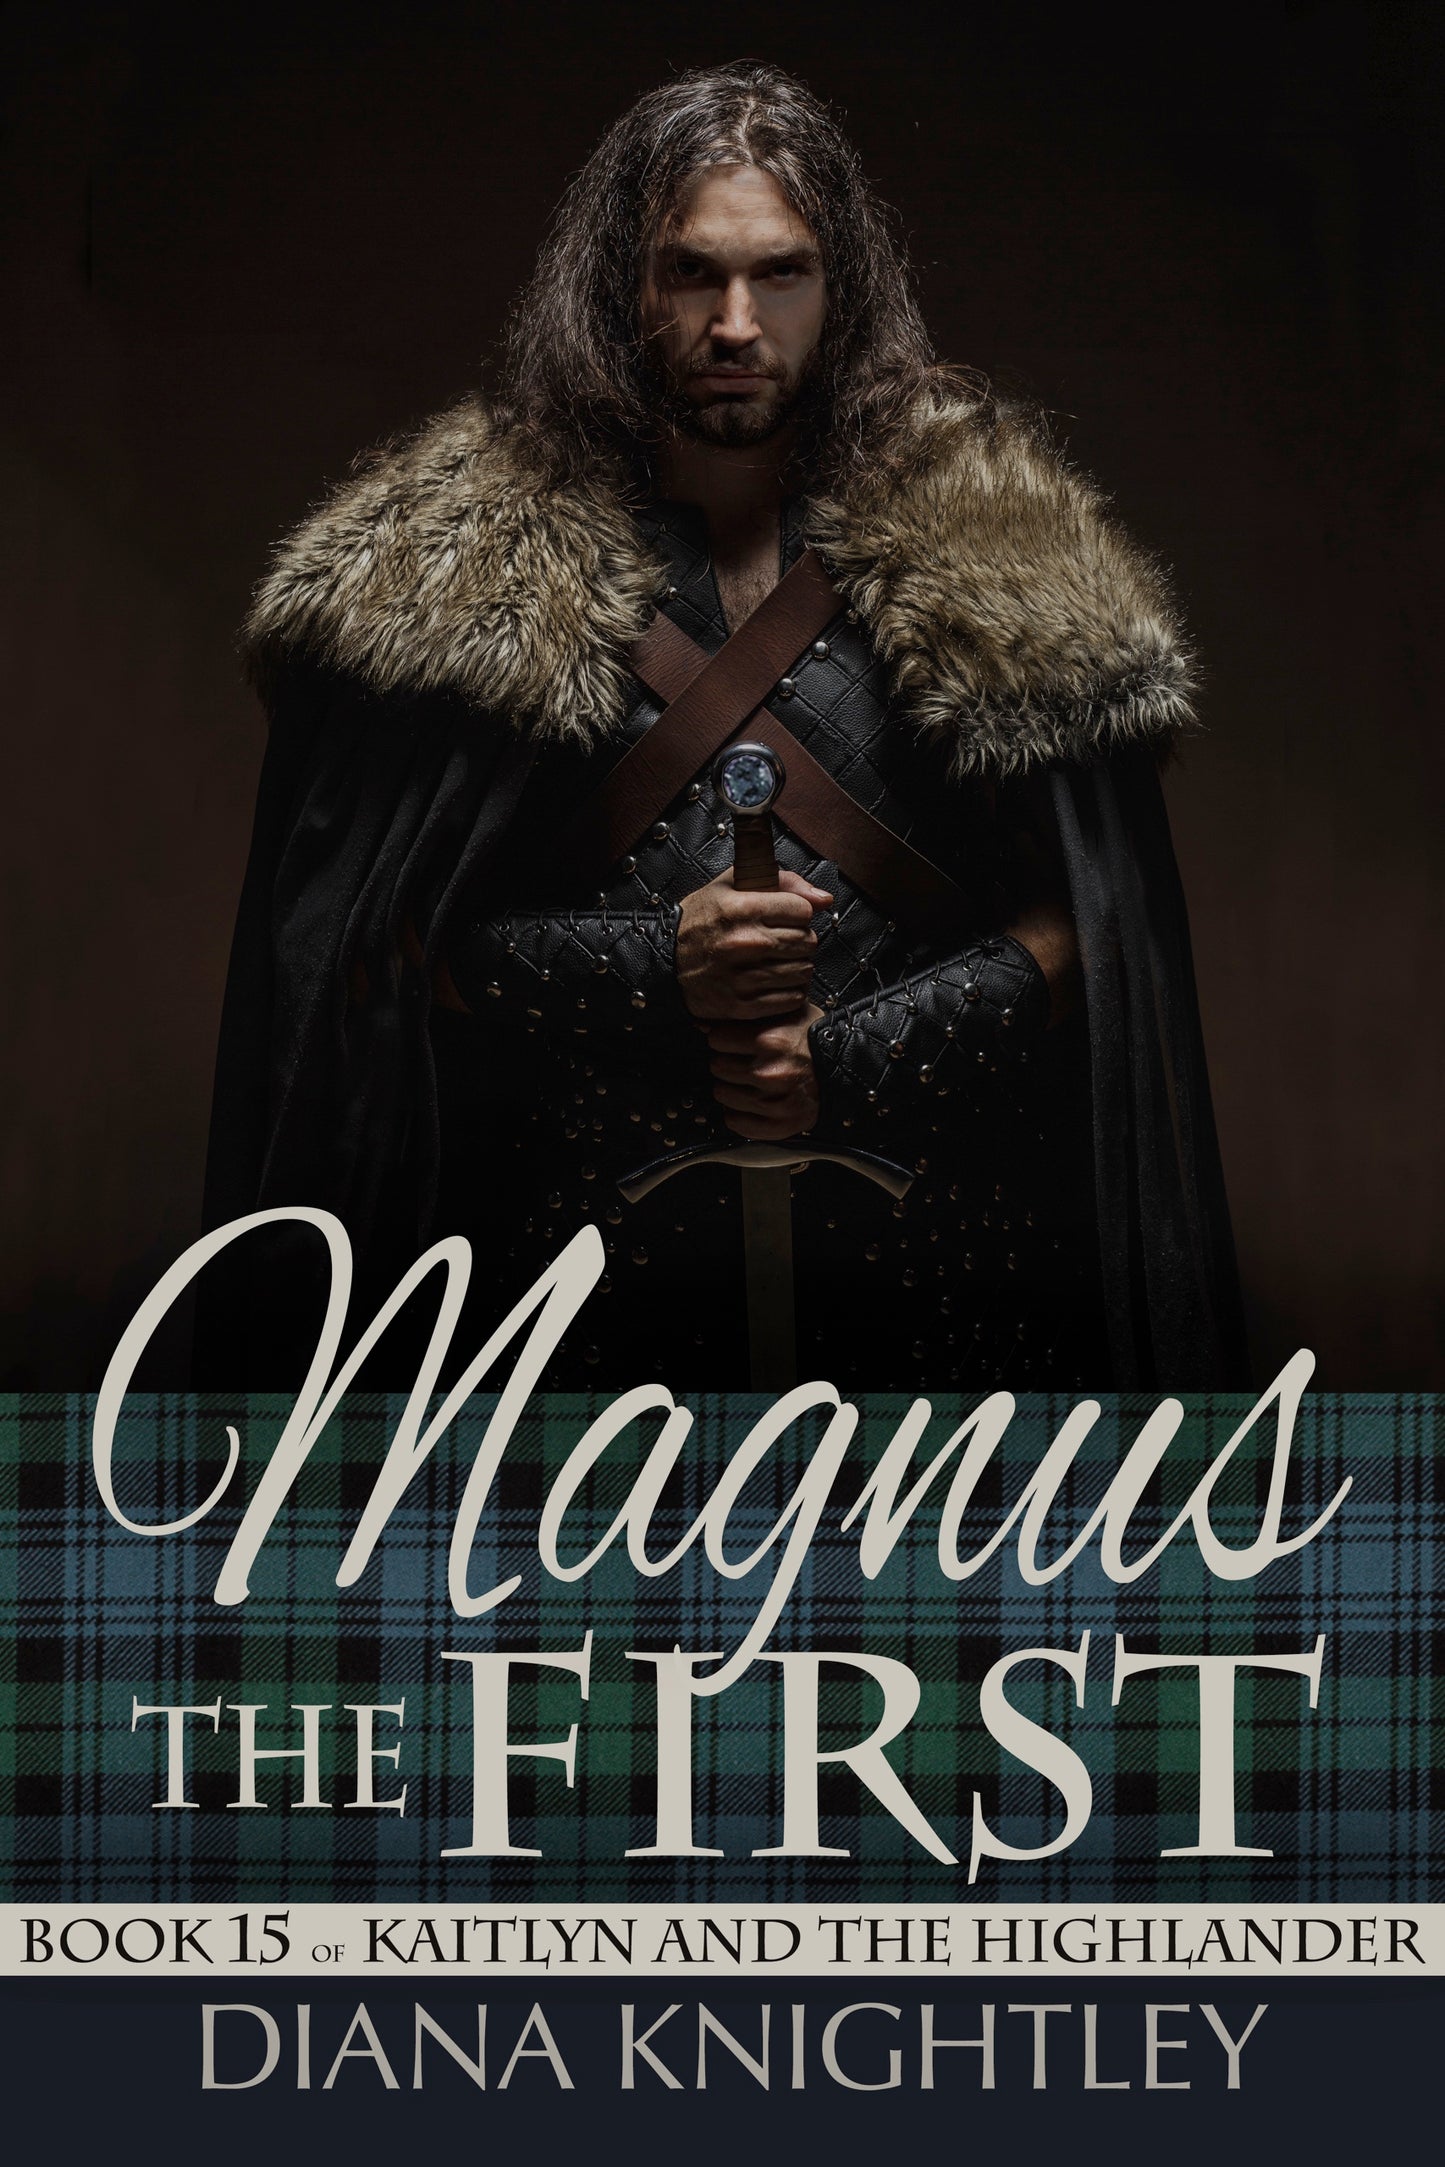 Book 15: Magnus The First (KATH)